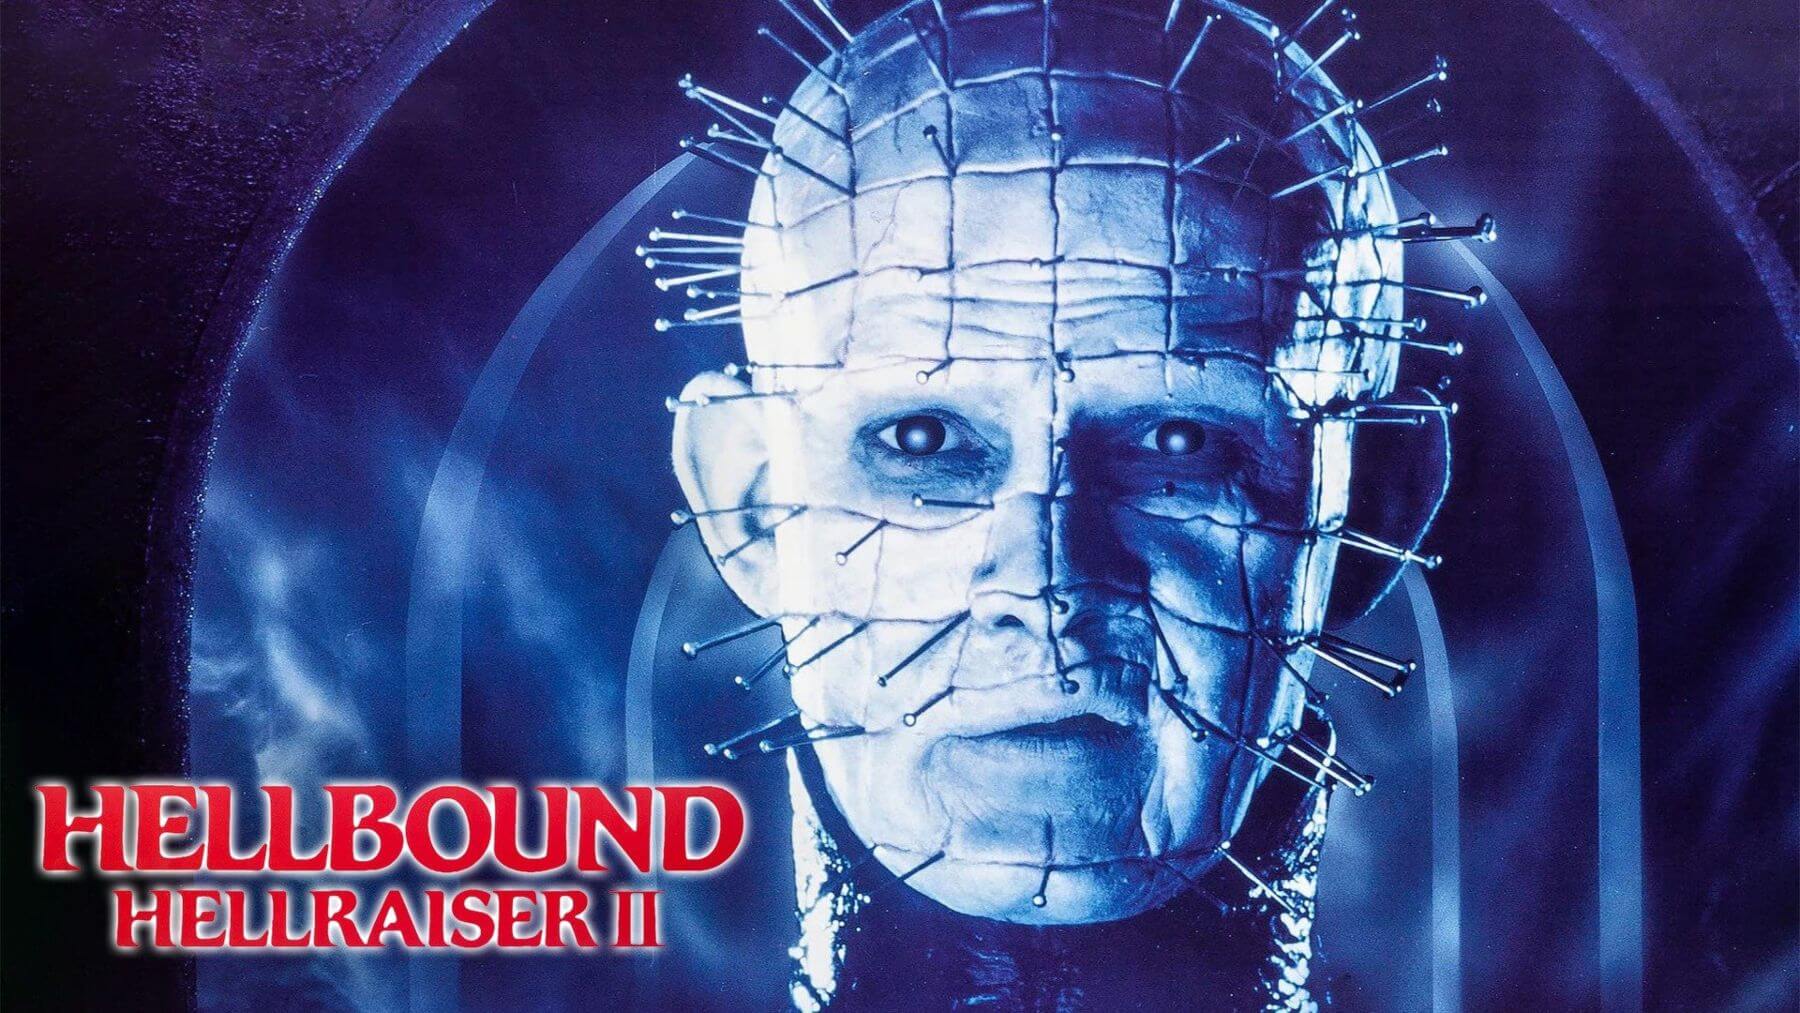 34-facts-about-the-movie-hellbound-hellraiser-ii